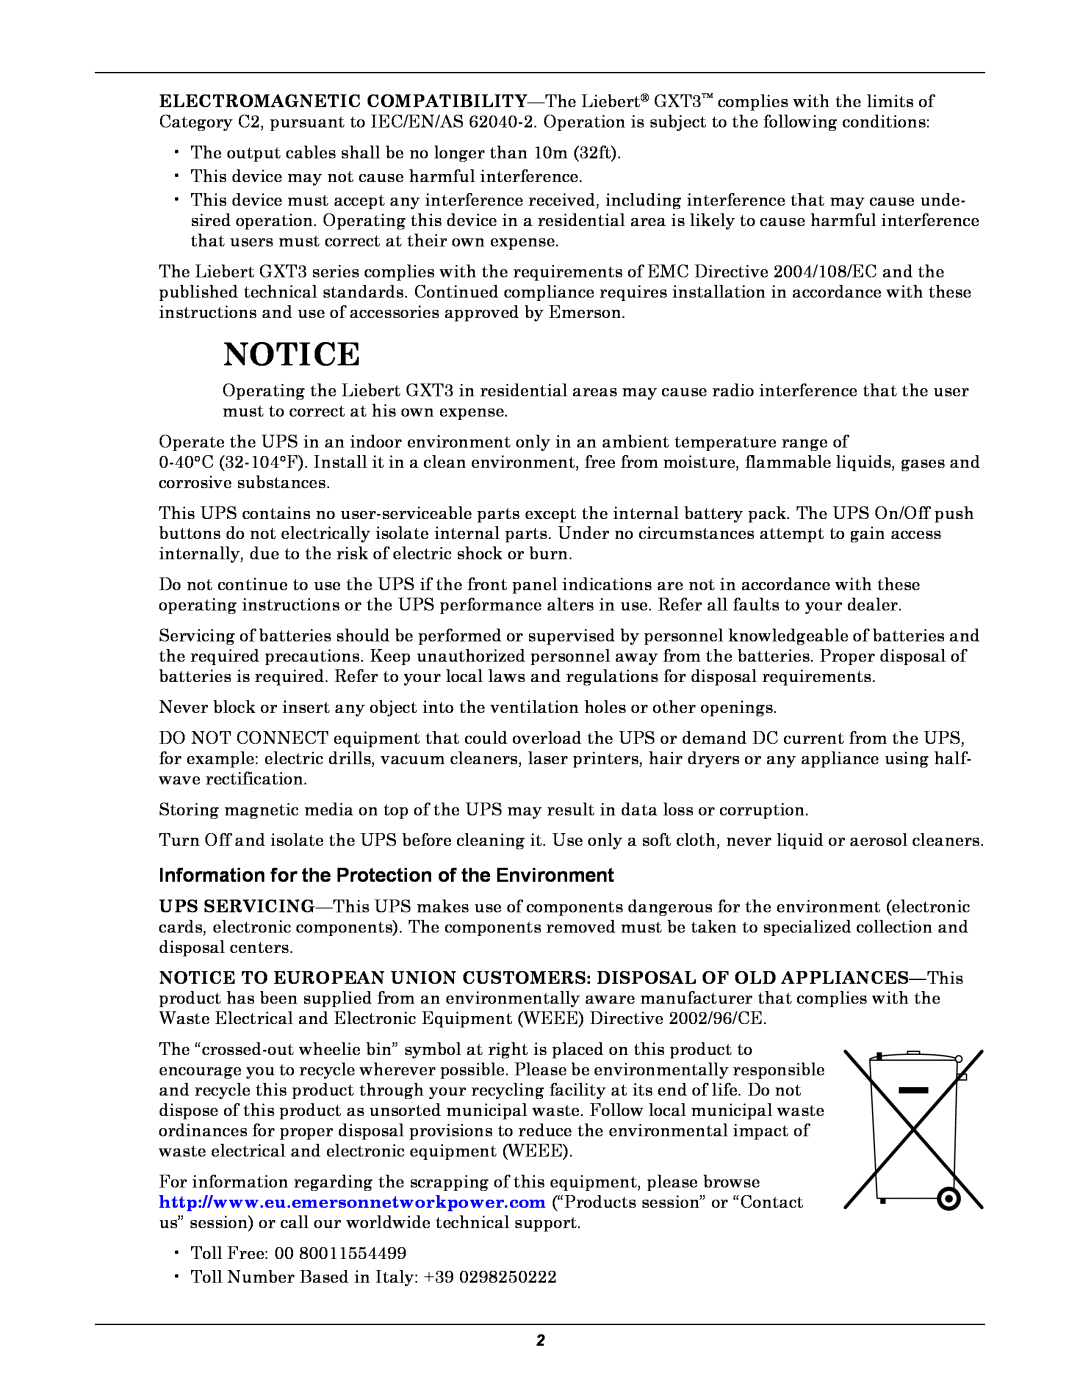 Emerson GXT3 230V user manual Notice, Information for the Protection of the Environment 